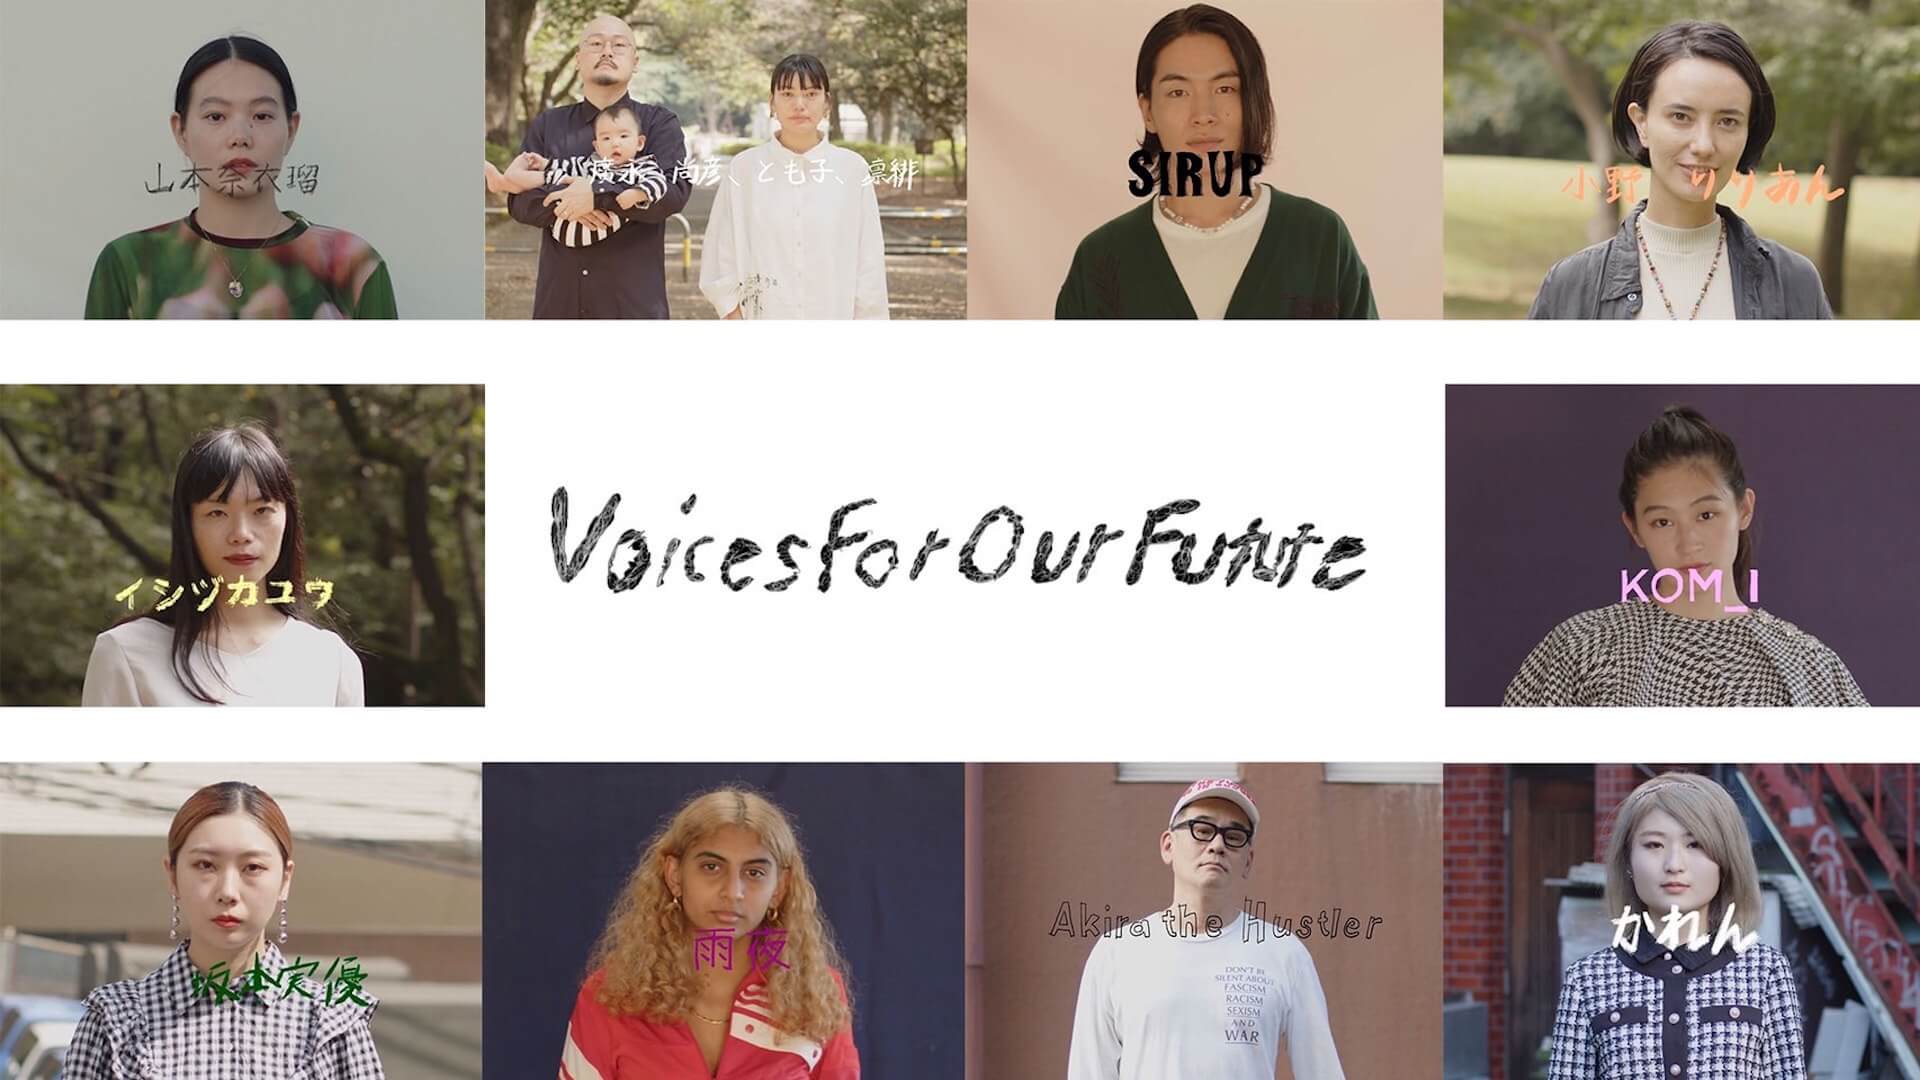 Voices For Our Future